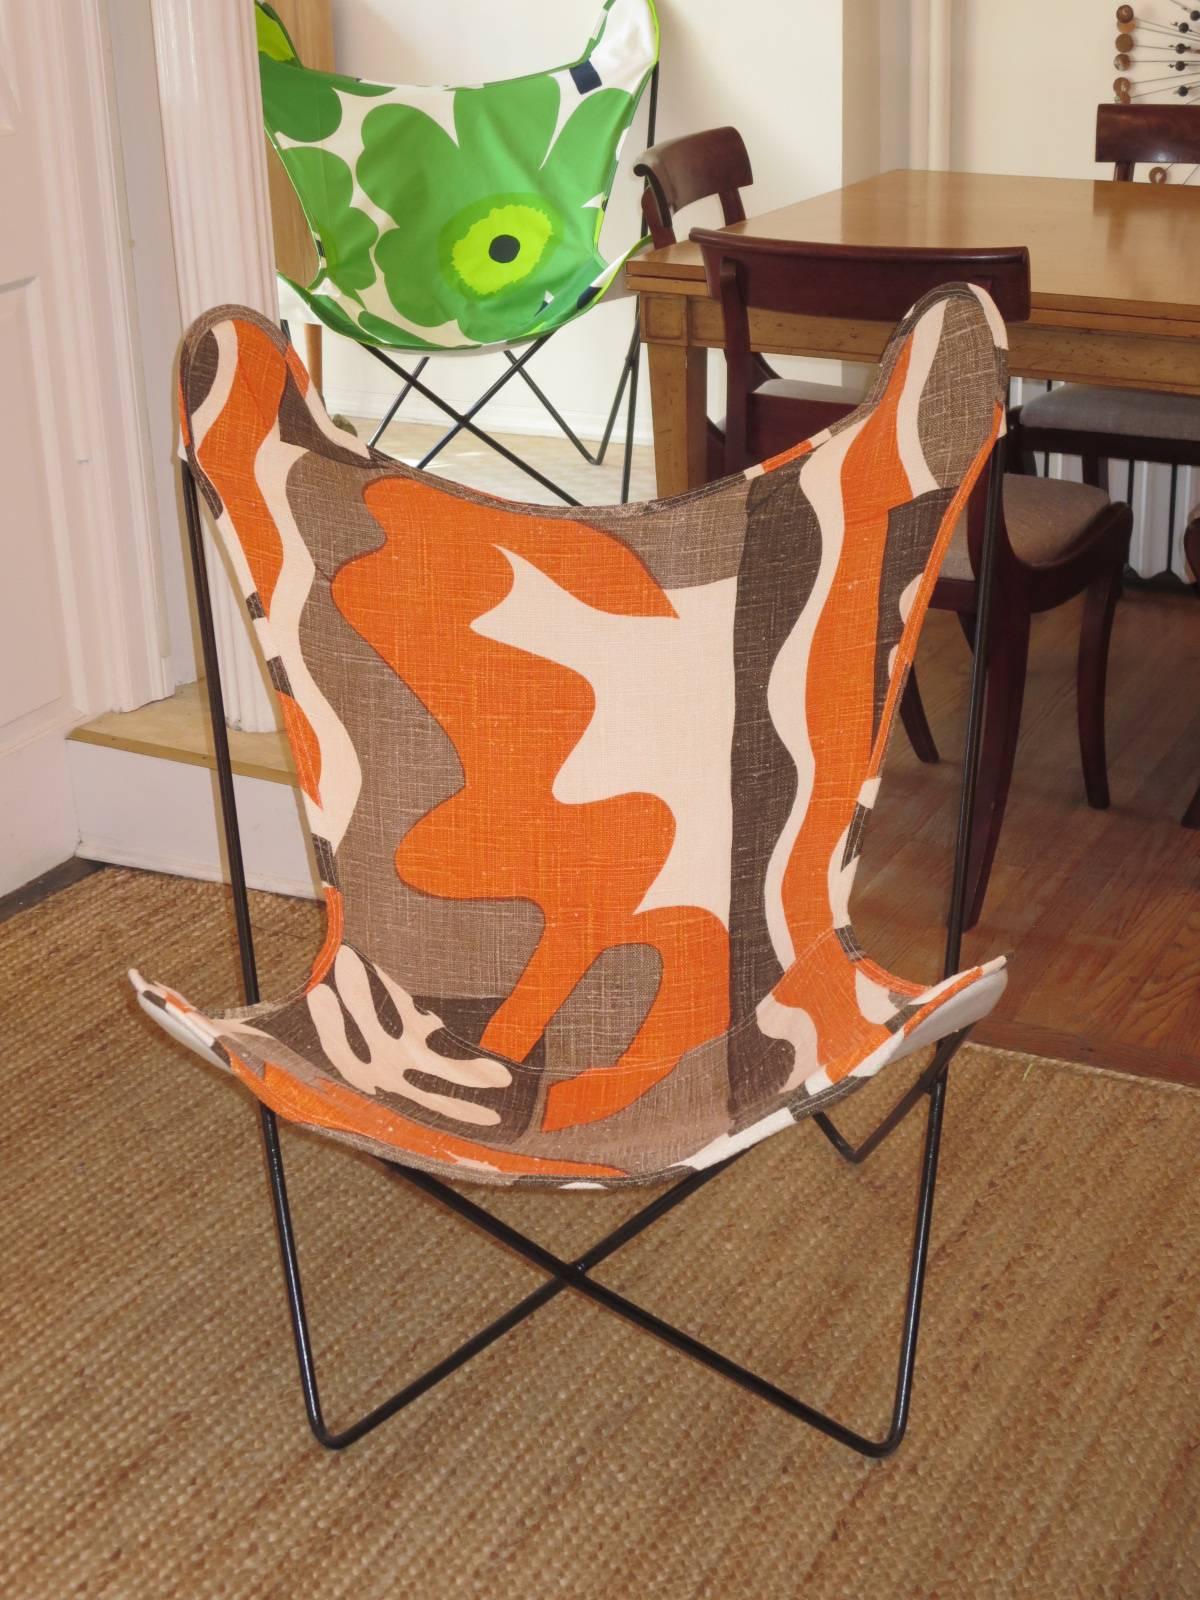 Iconic Knoll butterfly chair with custom-made sling. The Fabric used to make the sling is vintage and is backed in linen. The look is striking. The chair is very comfortable and sturdy. Can be used inside or outside. We have other butterfly chairs